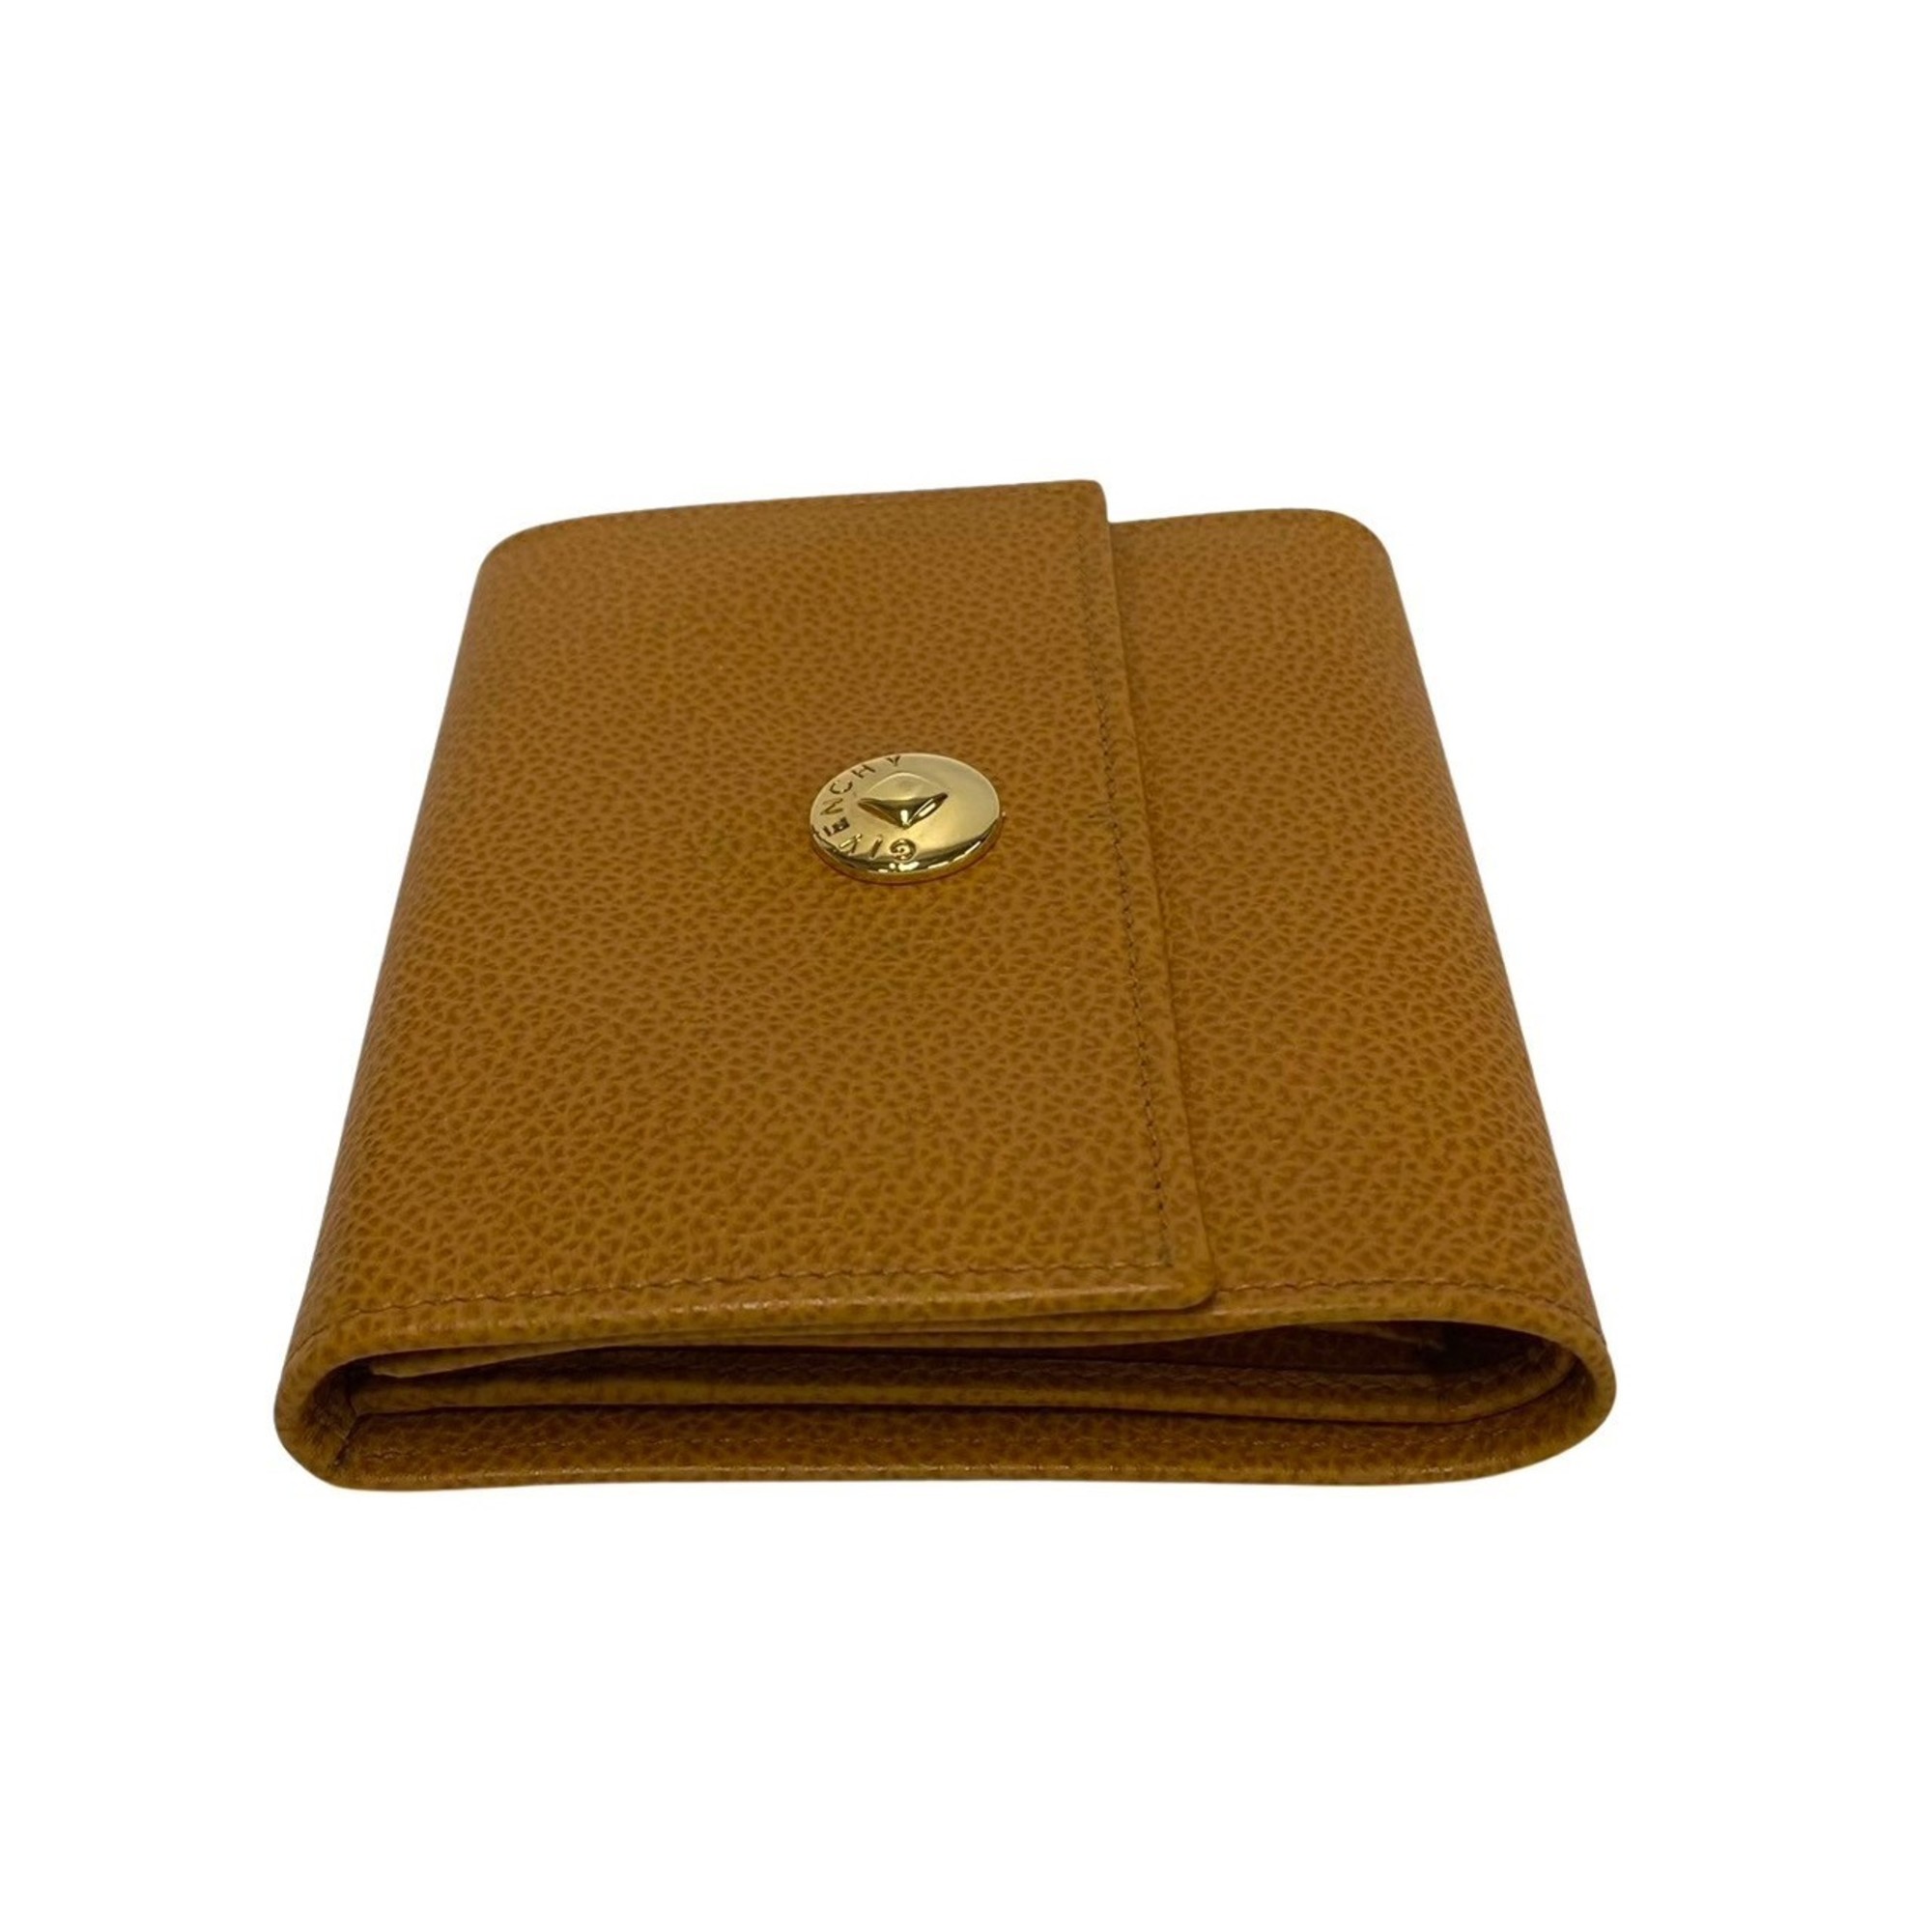 GIVENCHY Button hardware leather tri-fold wallet brown camel 35476